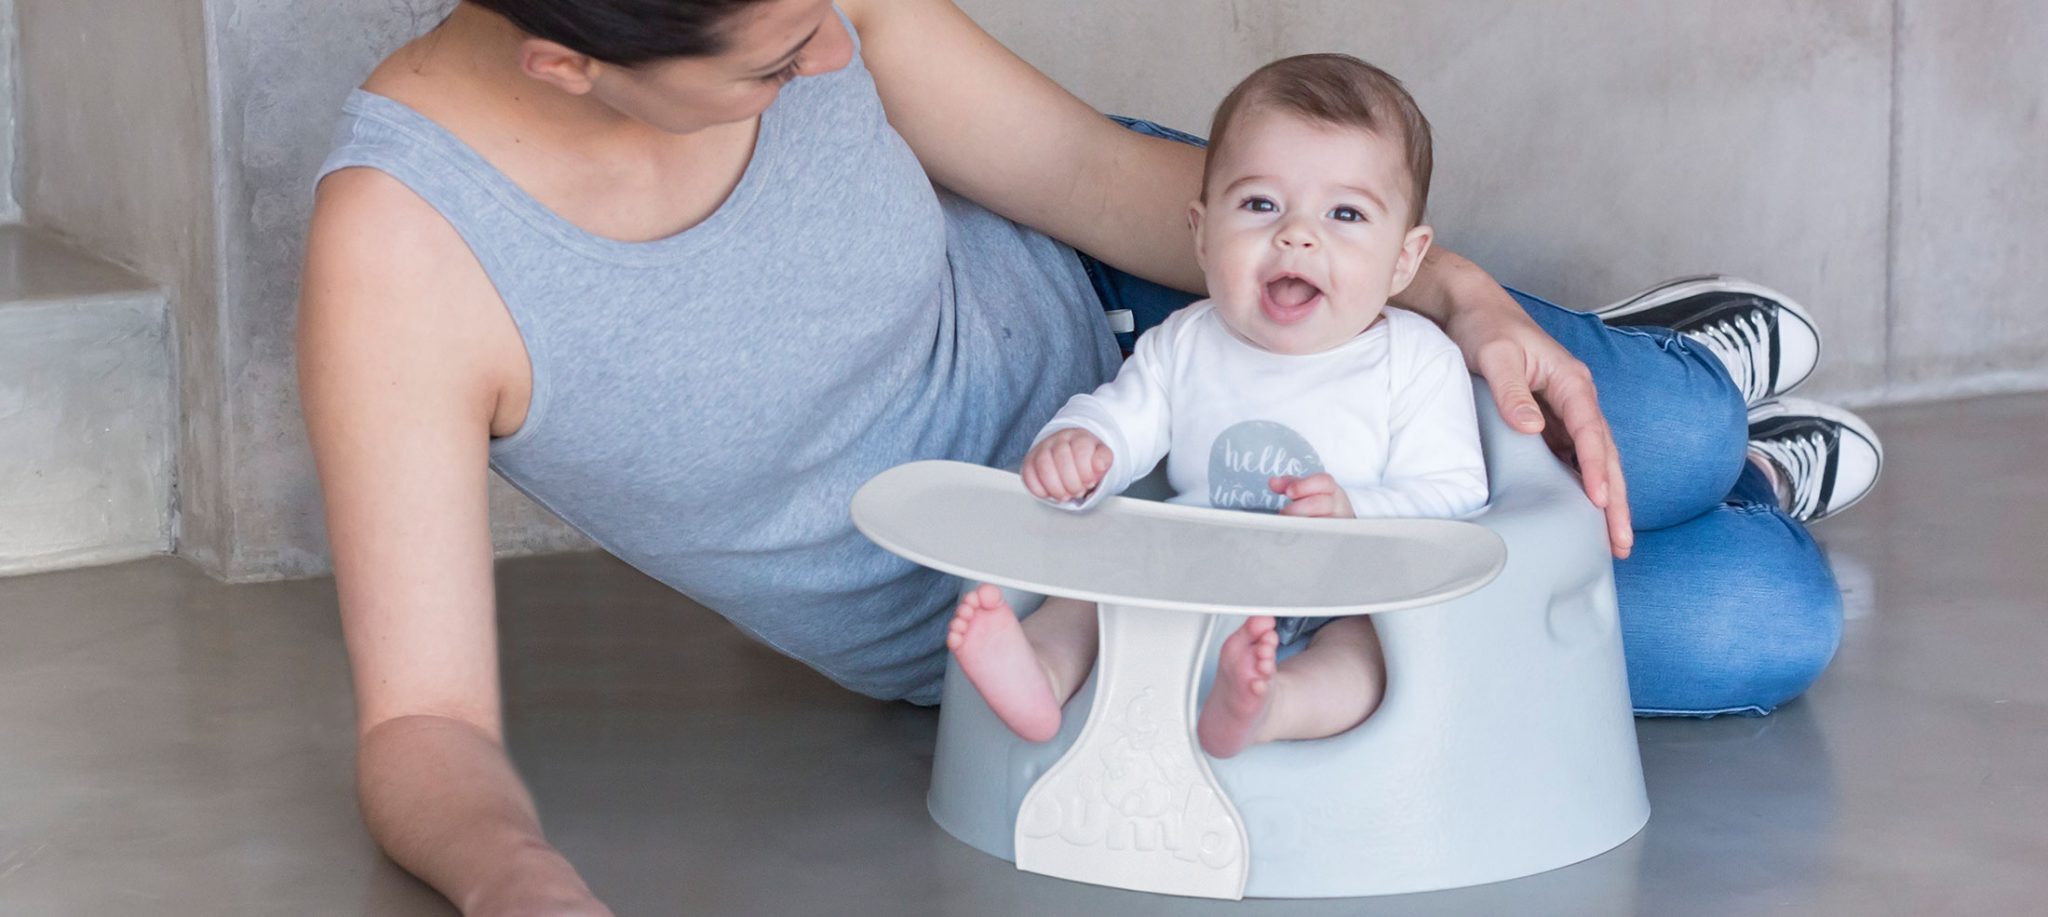 bumbo seat without straps